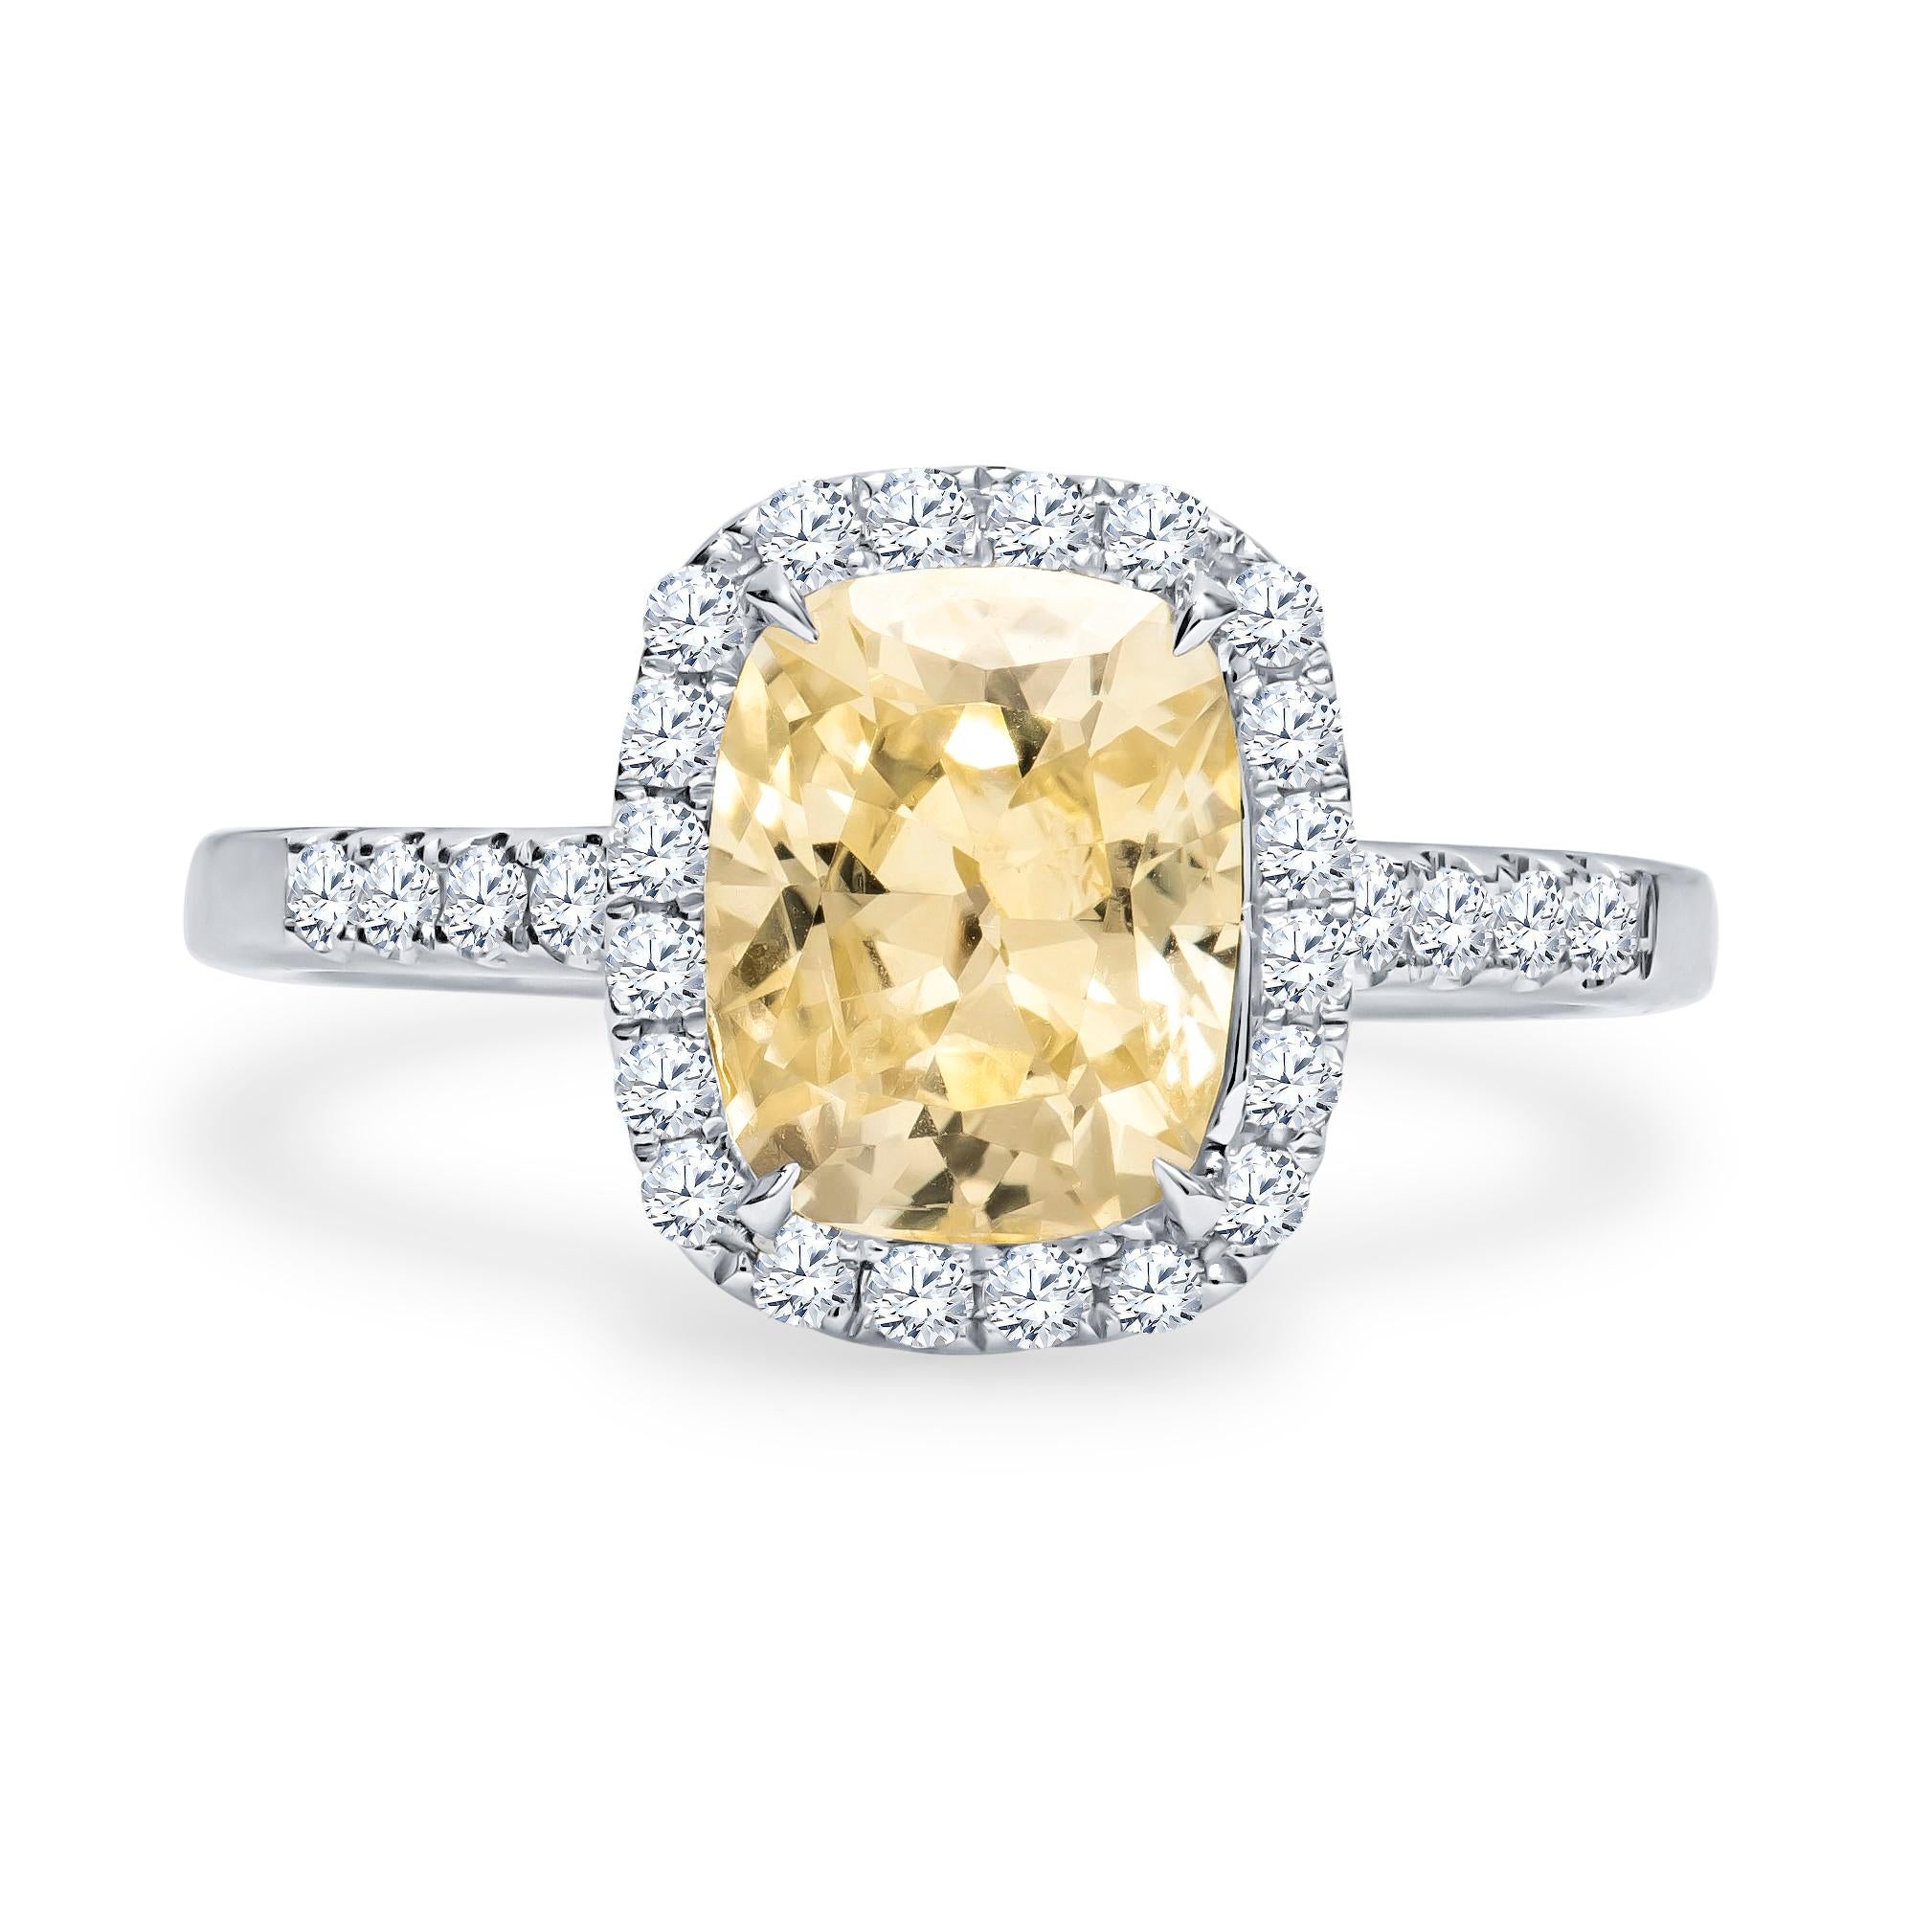 18K white gold ring with a 2.82 carat cushion cut natural no heat Sri Lanka (Ceylon) yellow sapphire with a GIA laboratory report, and 0.40 carats total weight in round diamonds placed in halo and upper shank. This stunning ring was custom designed